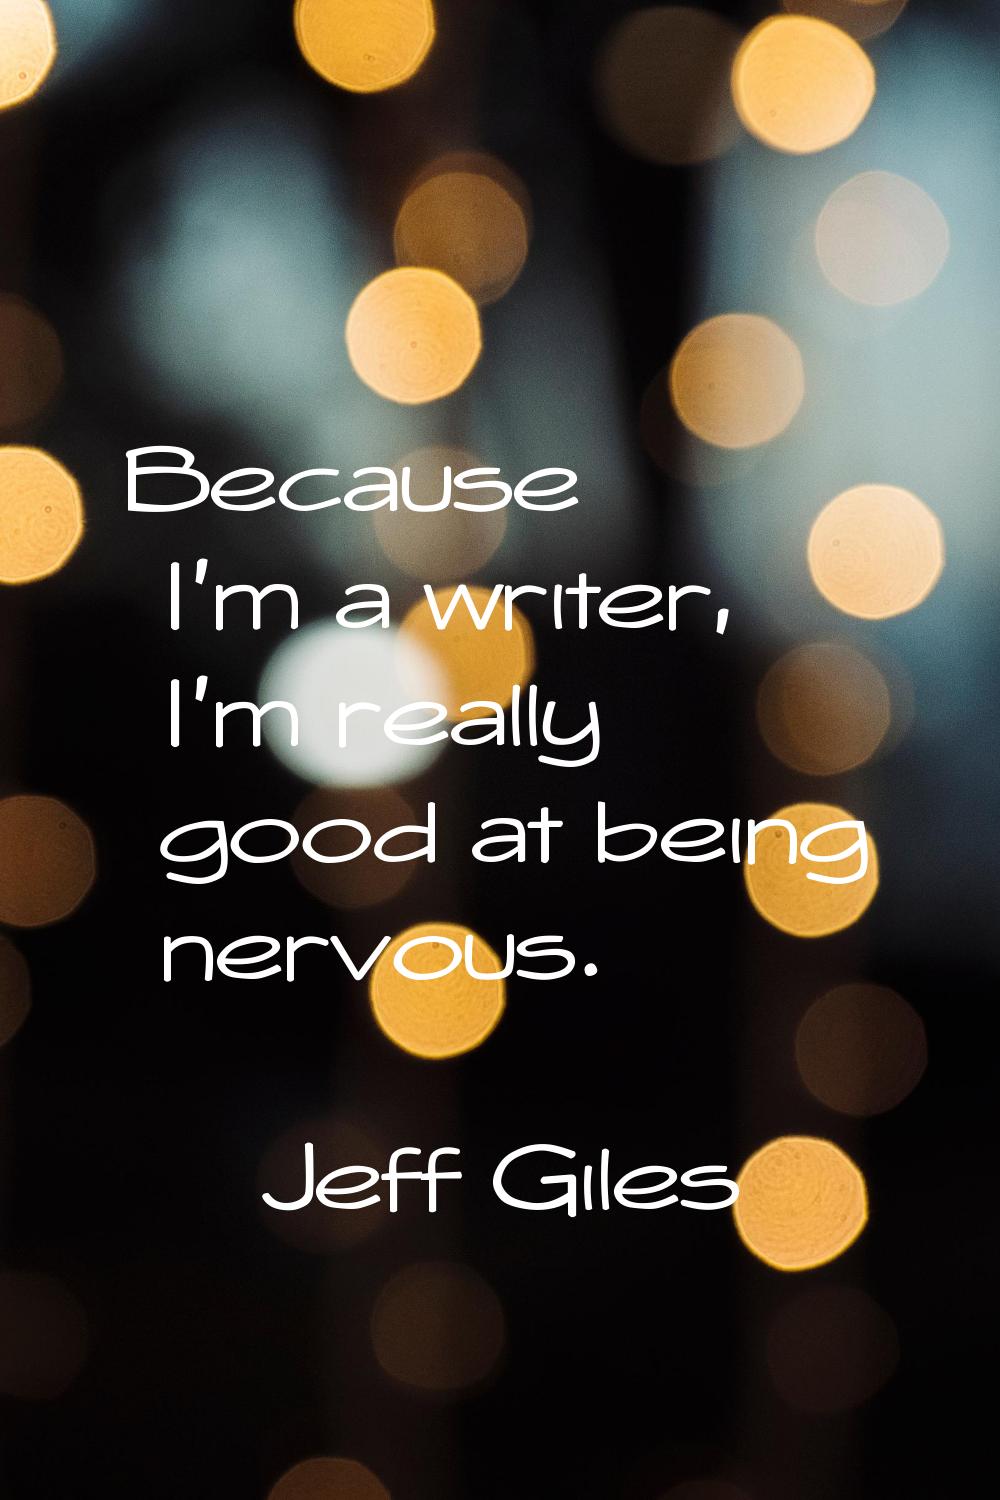 Because I'm a writer, I'm really good at being nervous.